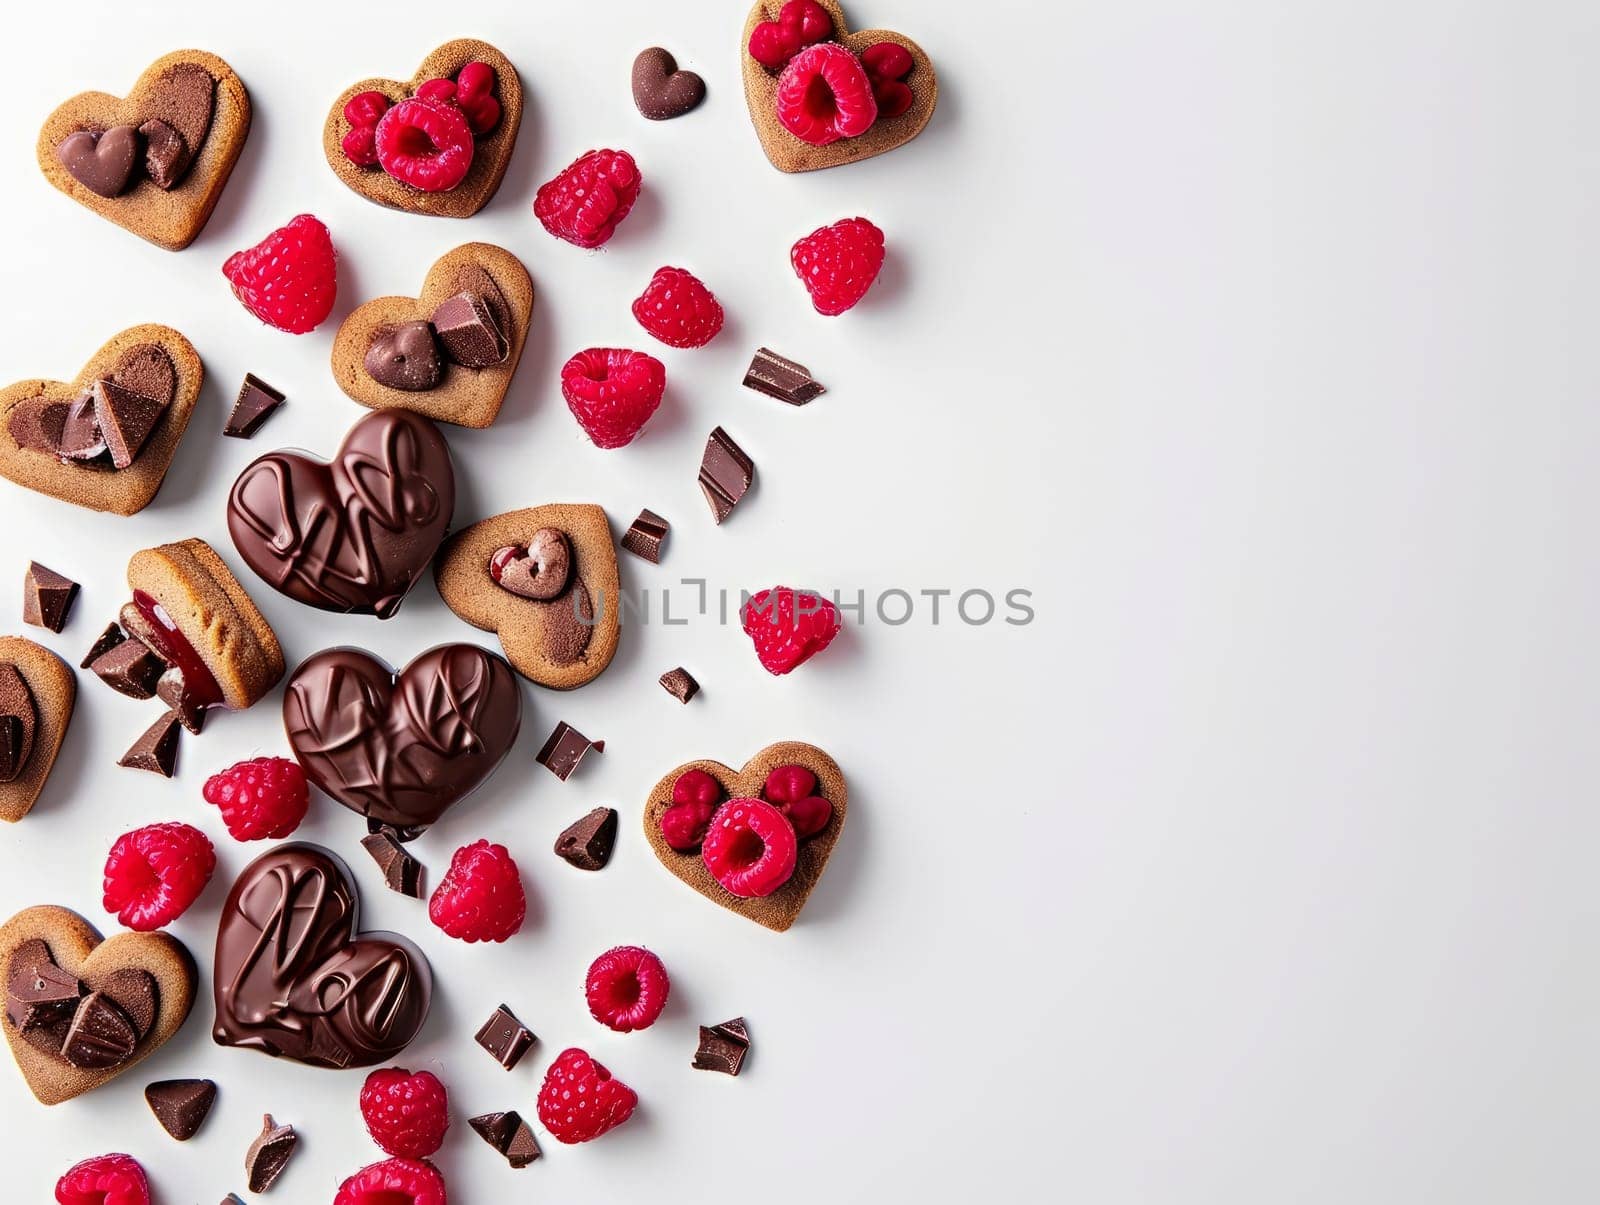 Tasty Yummy Homemade Sweet Cookies. Chocolate and Raspberry Heart Shape Pastry Dessert. Food Photo Background. Valentine's Day Composition. by iliris